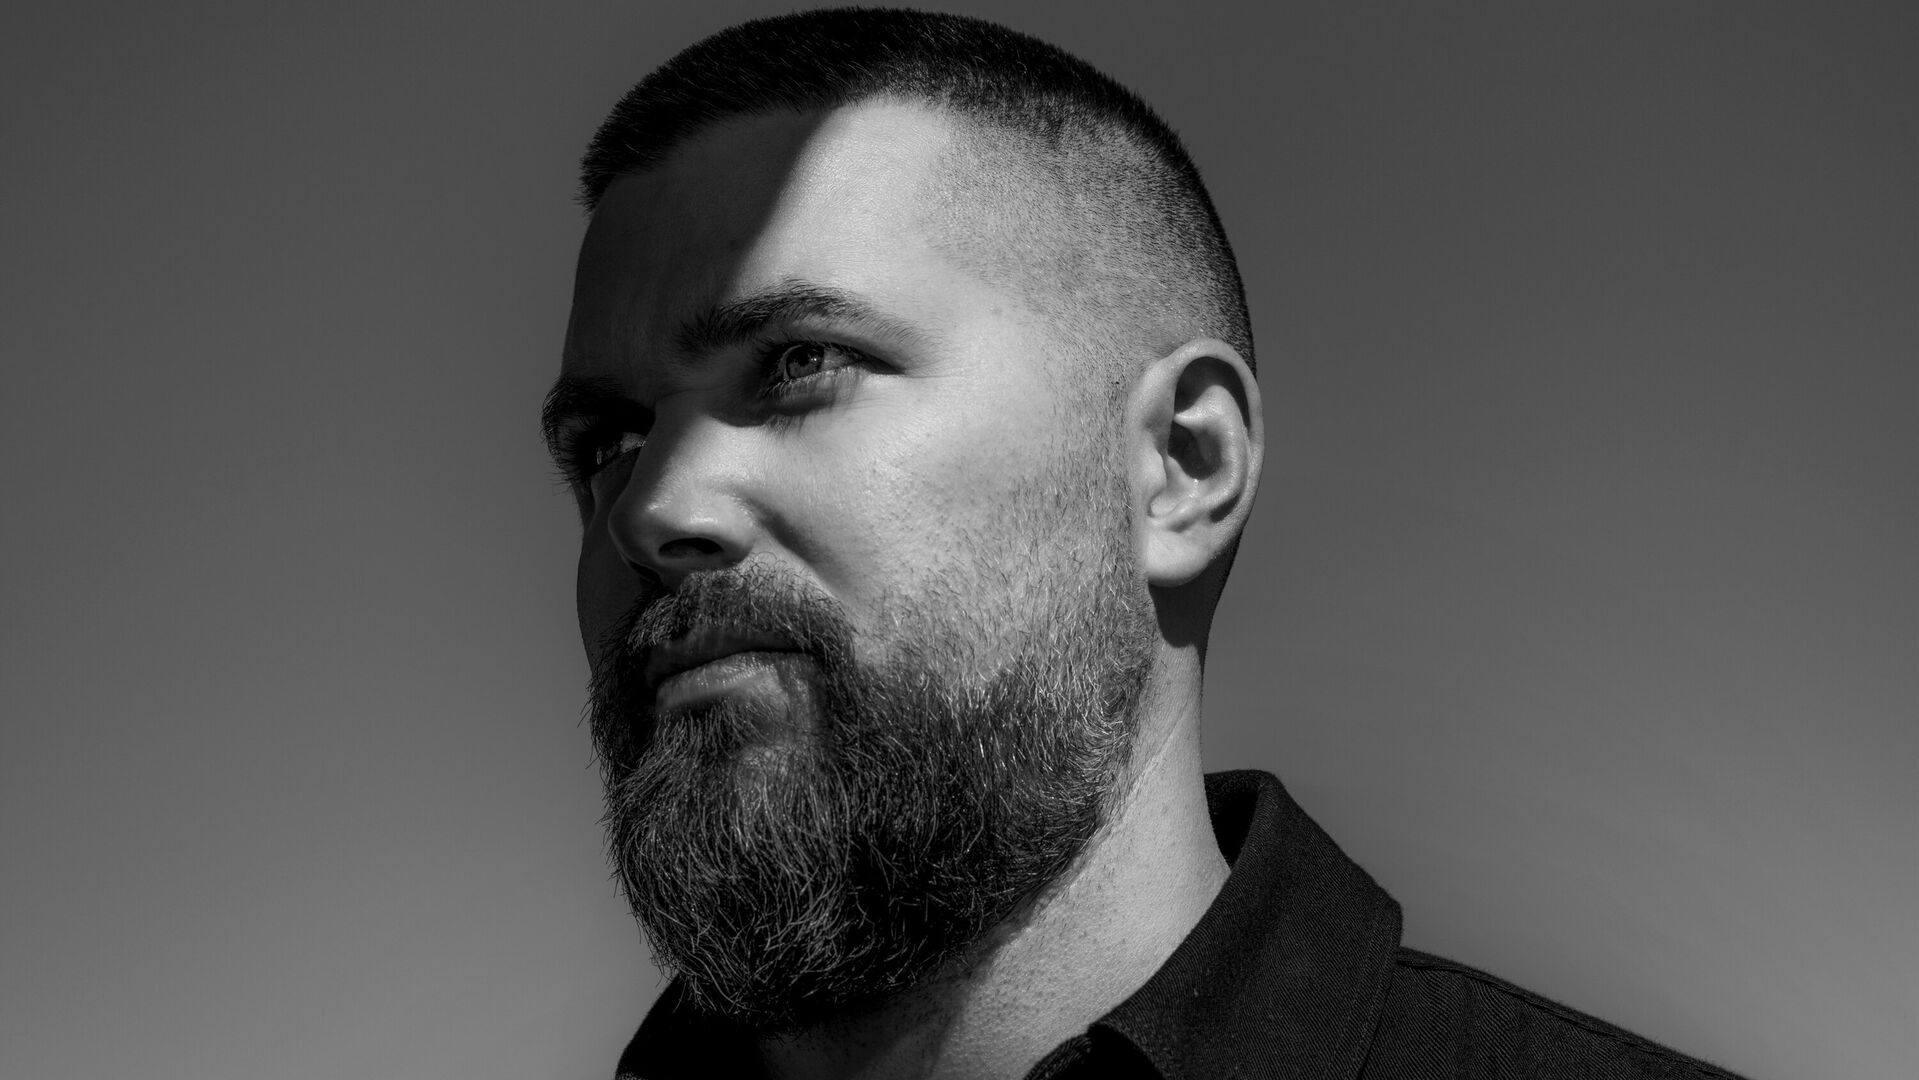 Must see: all eyes on the director | Robert Eggers